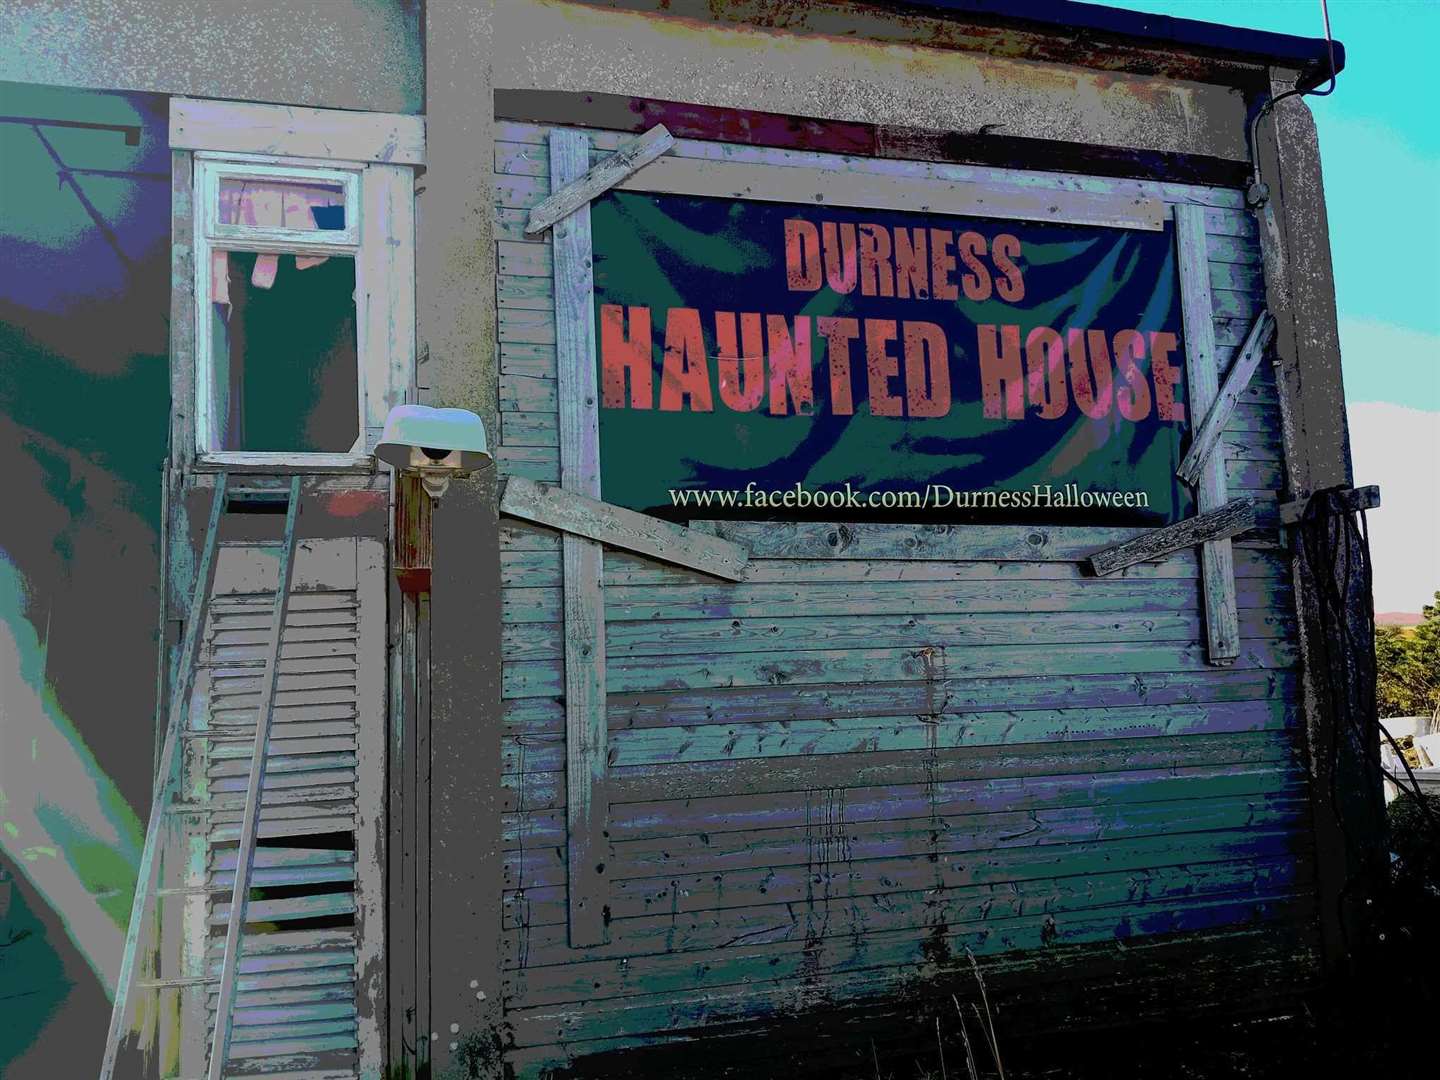 An abandoned, empty shell of a building has been turned into a spooky house over two storeys.